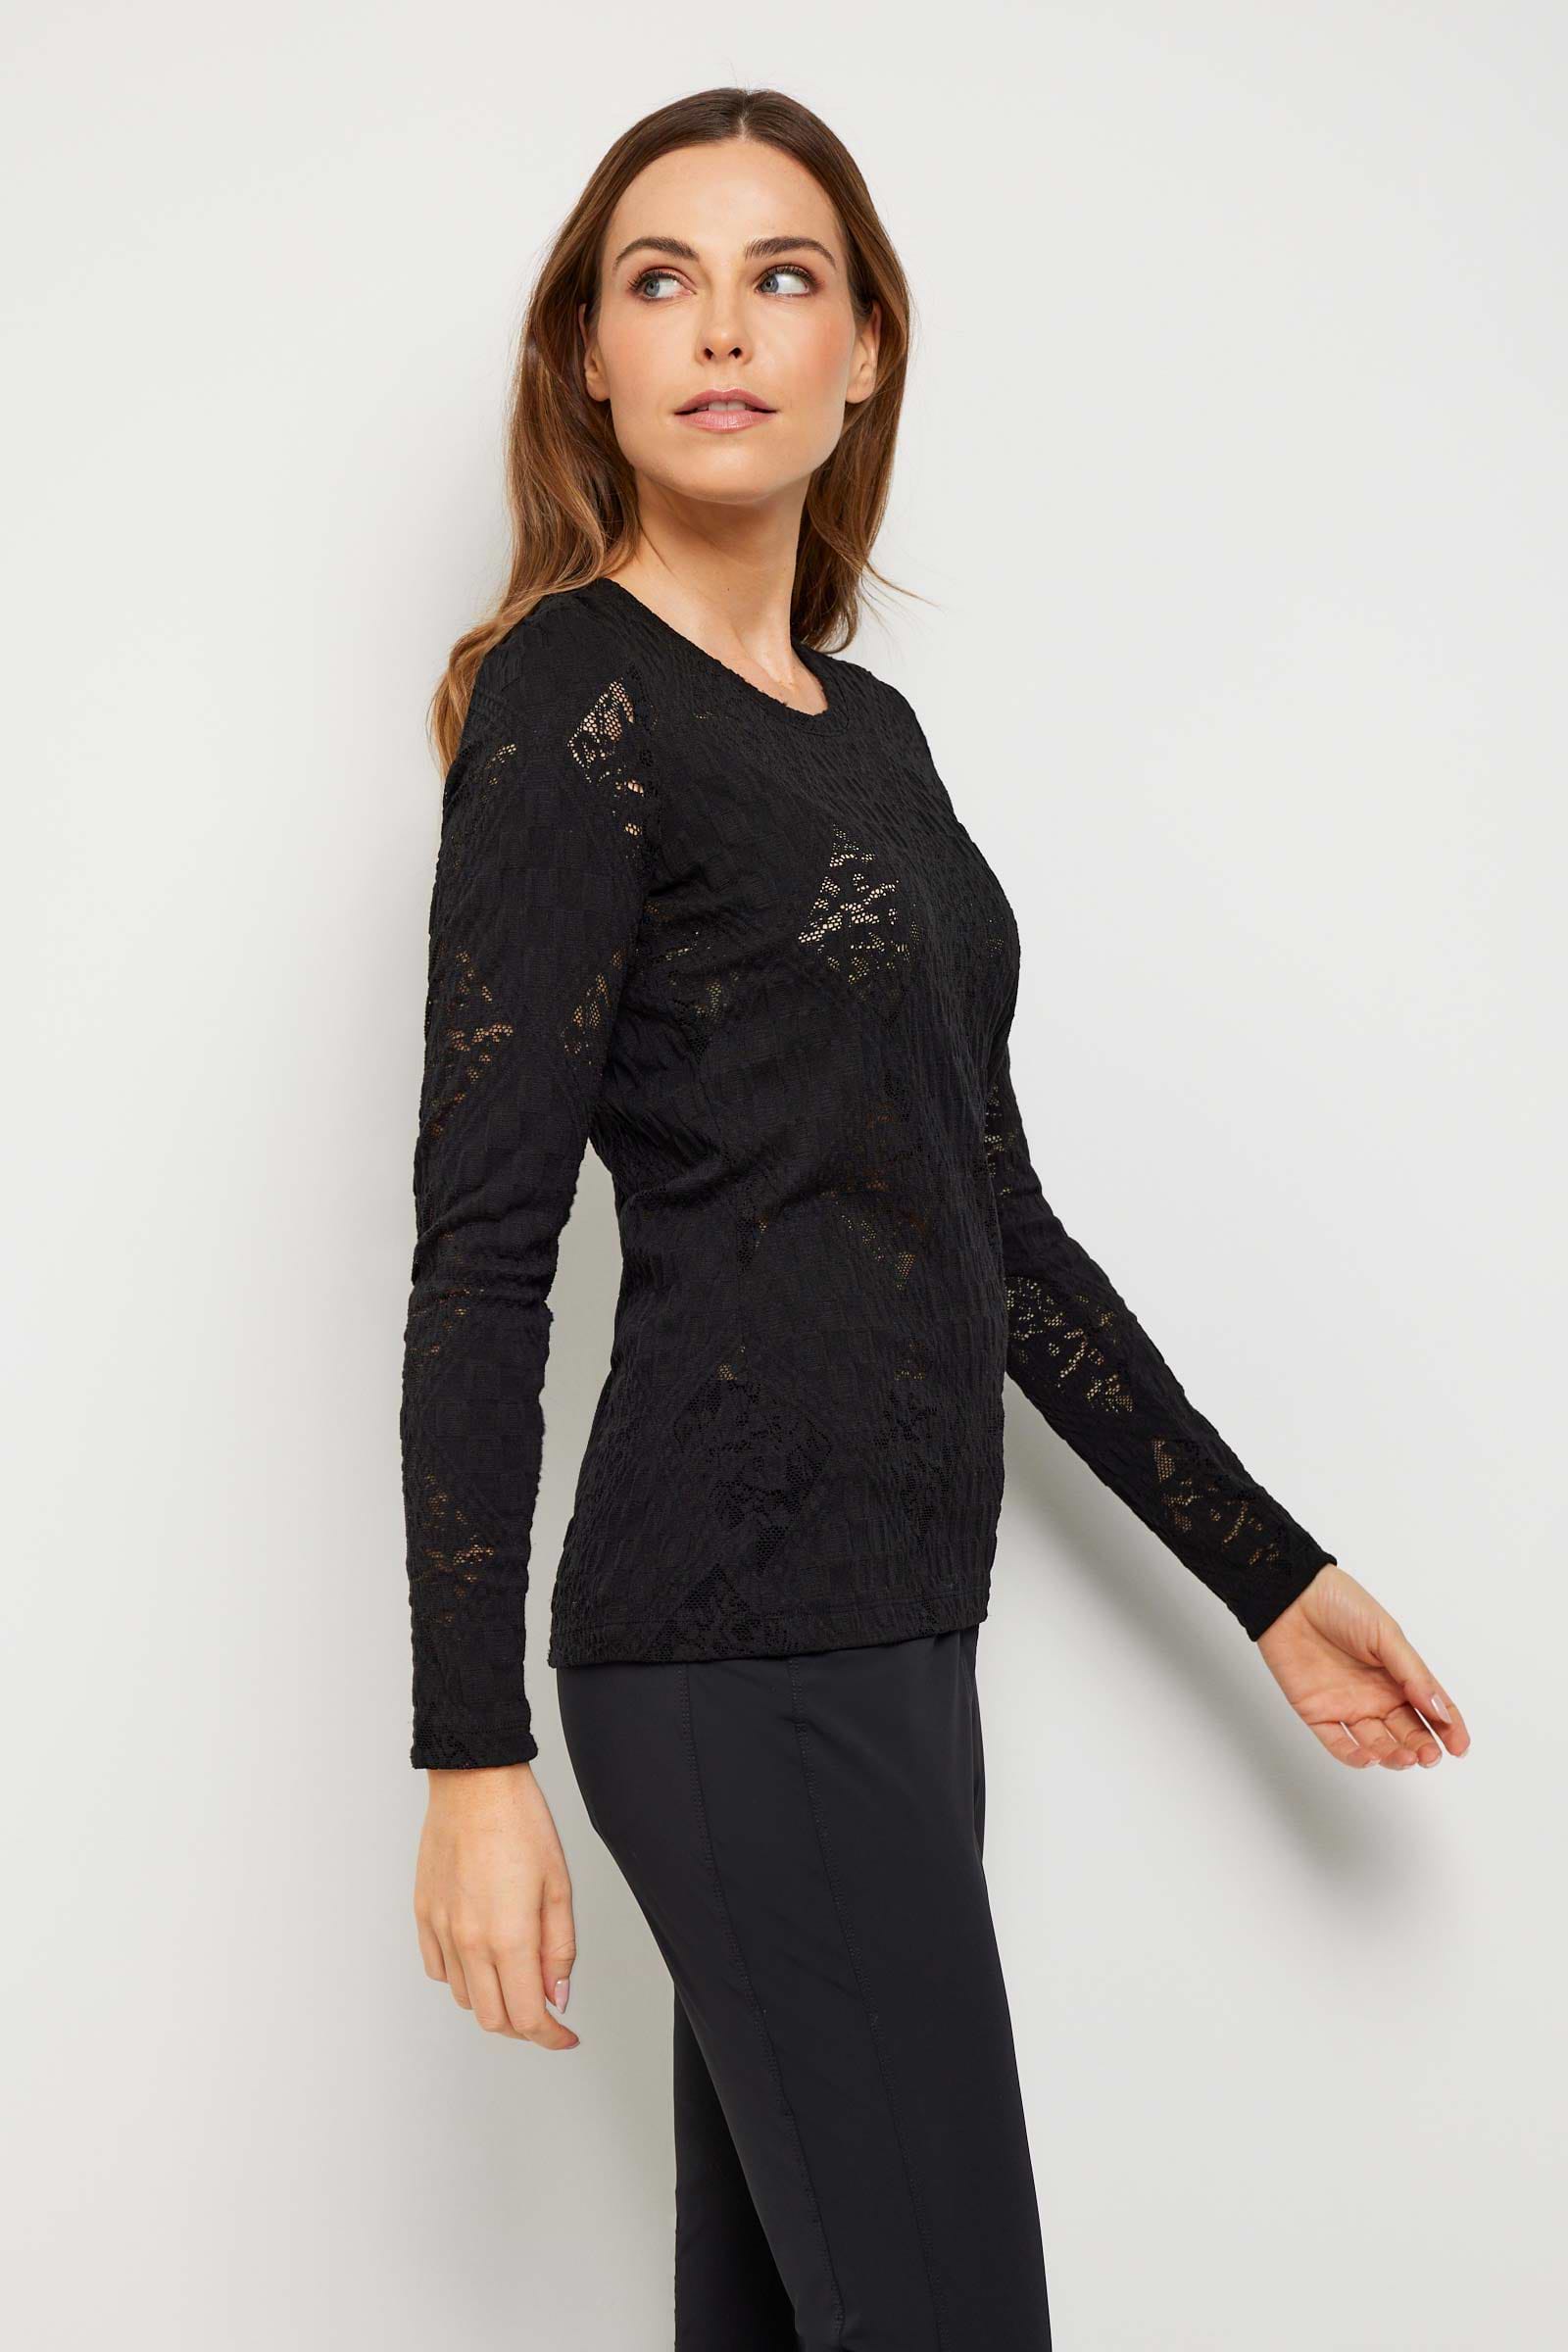 The Best Travel Top. Woman Showing the Side Profile of a Lace Juliana Top in Black.